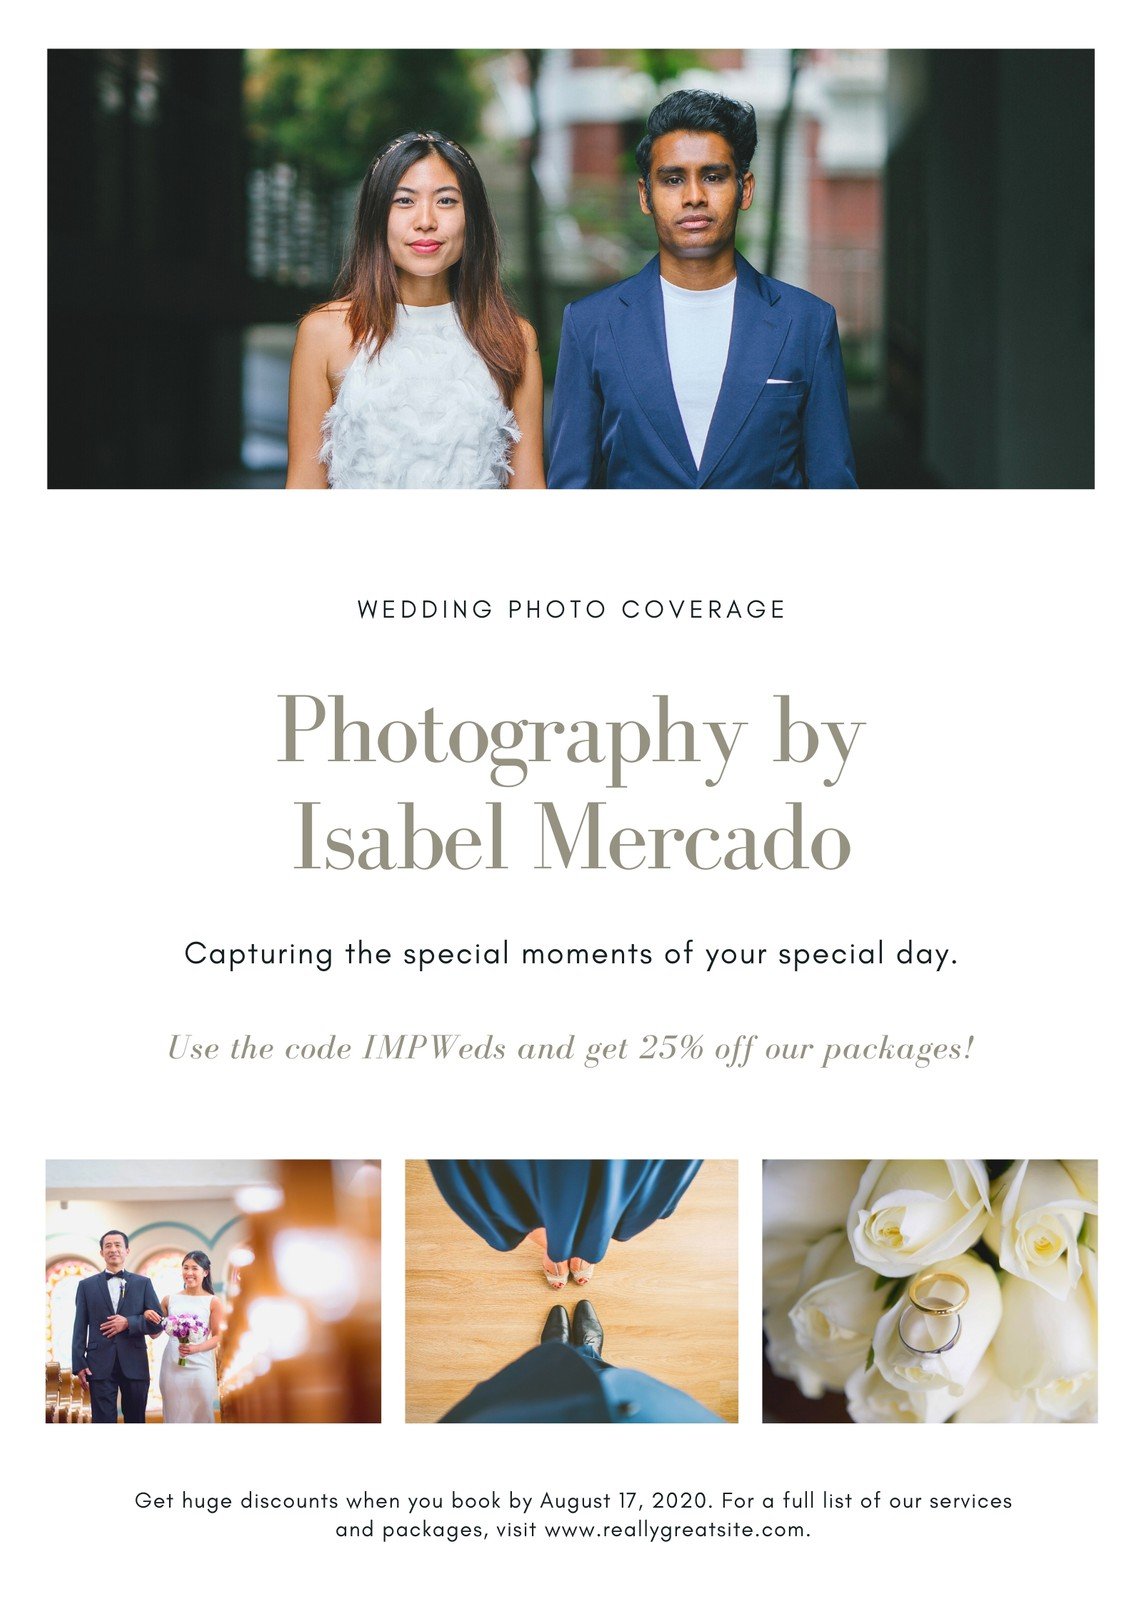 White Wedding Photography Flyer - Templates by Canva